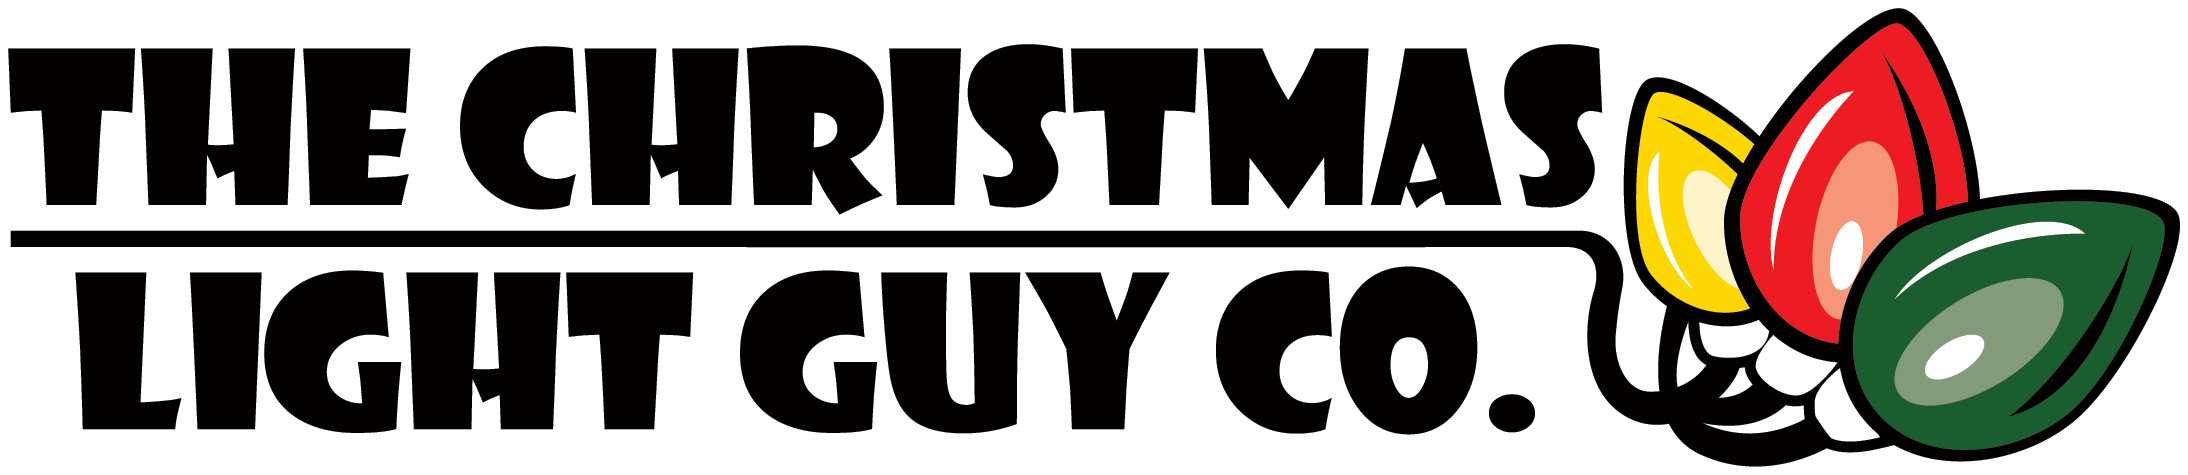 Text of The Christmas Guy Co. Logo
with a solid line that has 3 Christmas lights attached to the right end